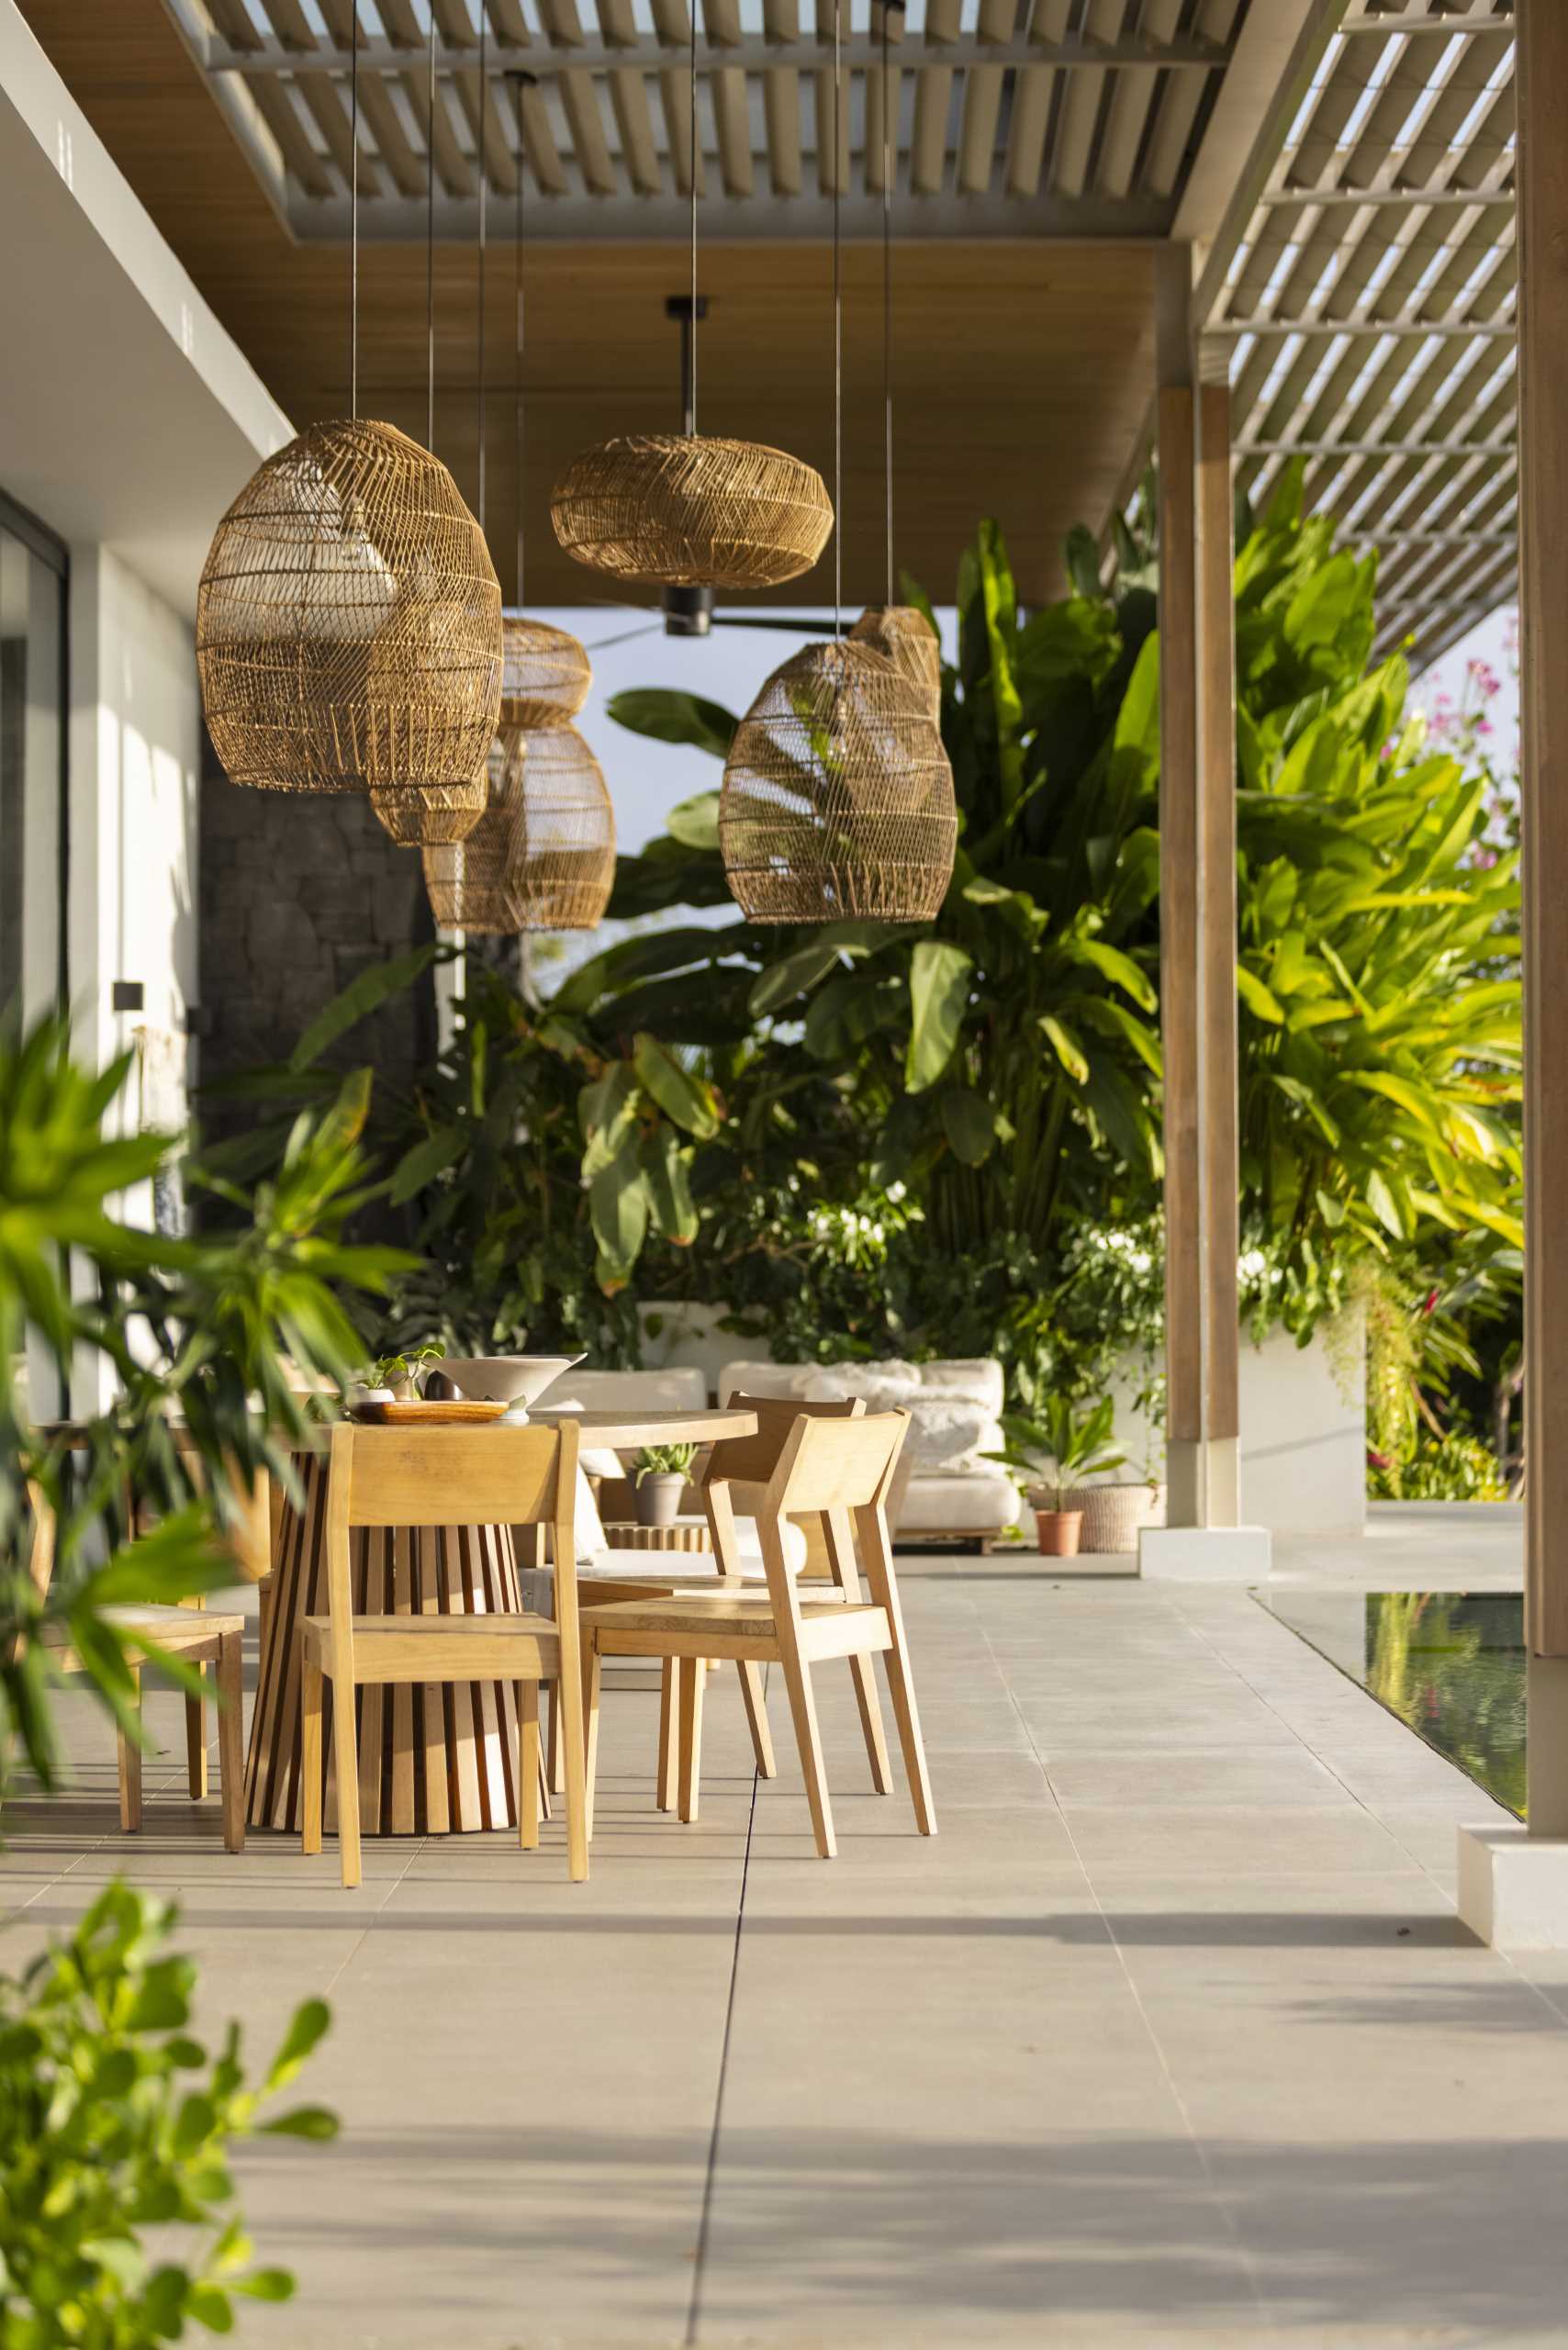 The pergola, which has oversized pendant lights and fans hanging above seating and dining areas, connects with the living room inside, and the swimming pool with views of the ocean.